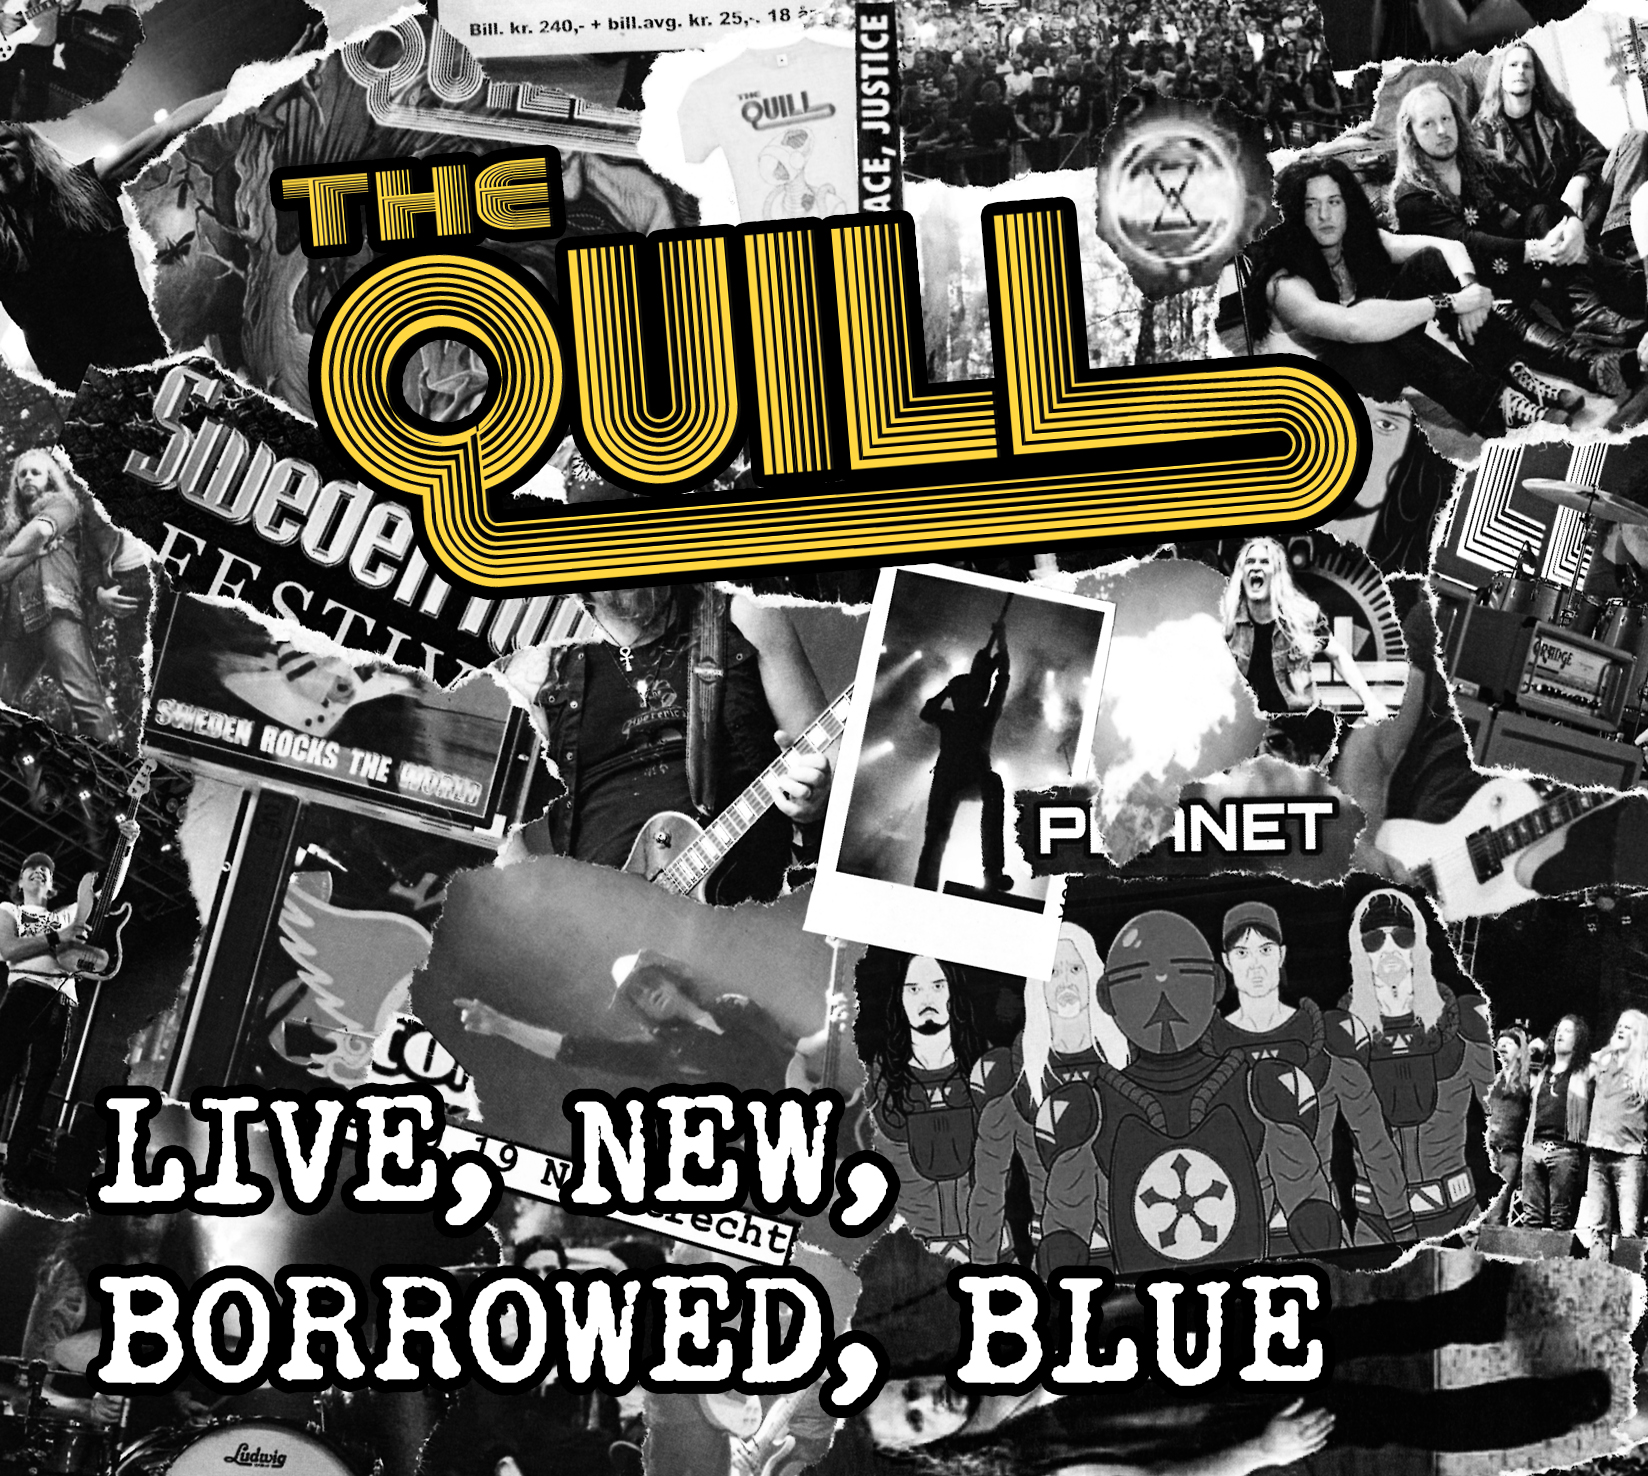 The Quill (S) – Live, New, Borrowed, Blue